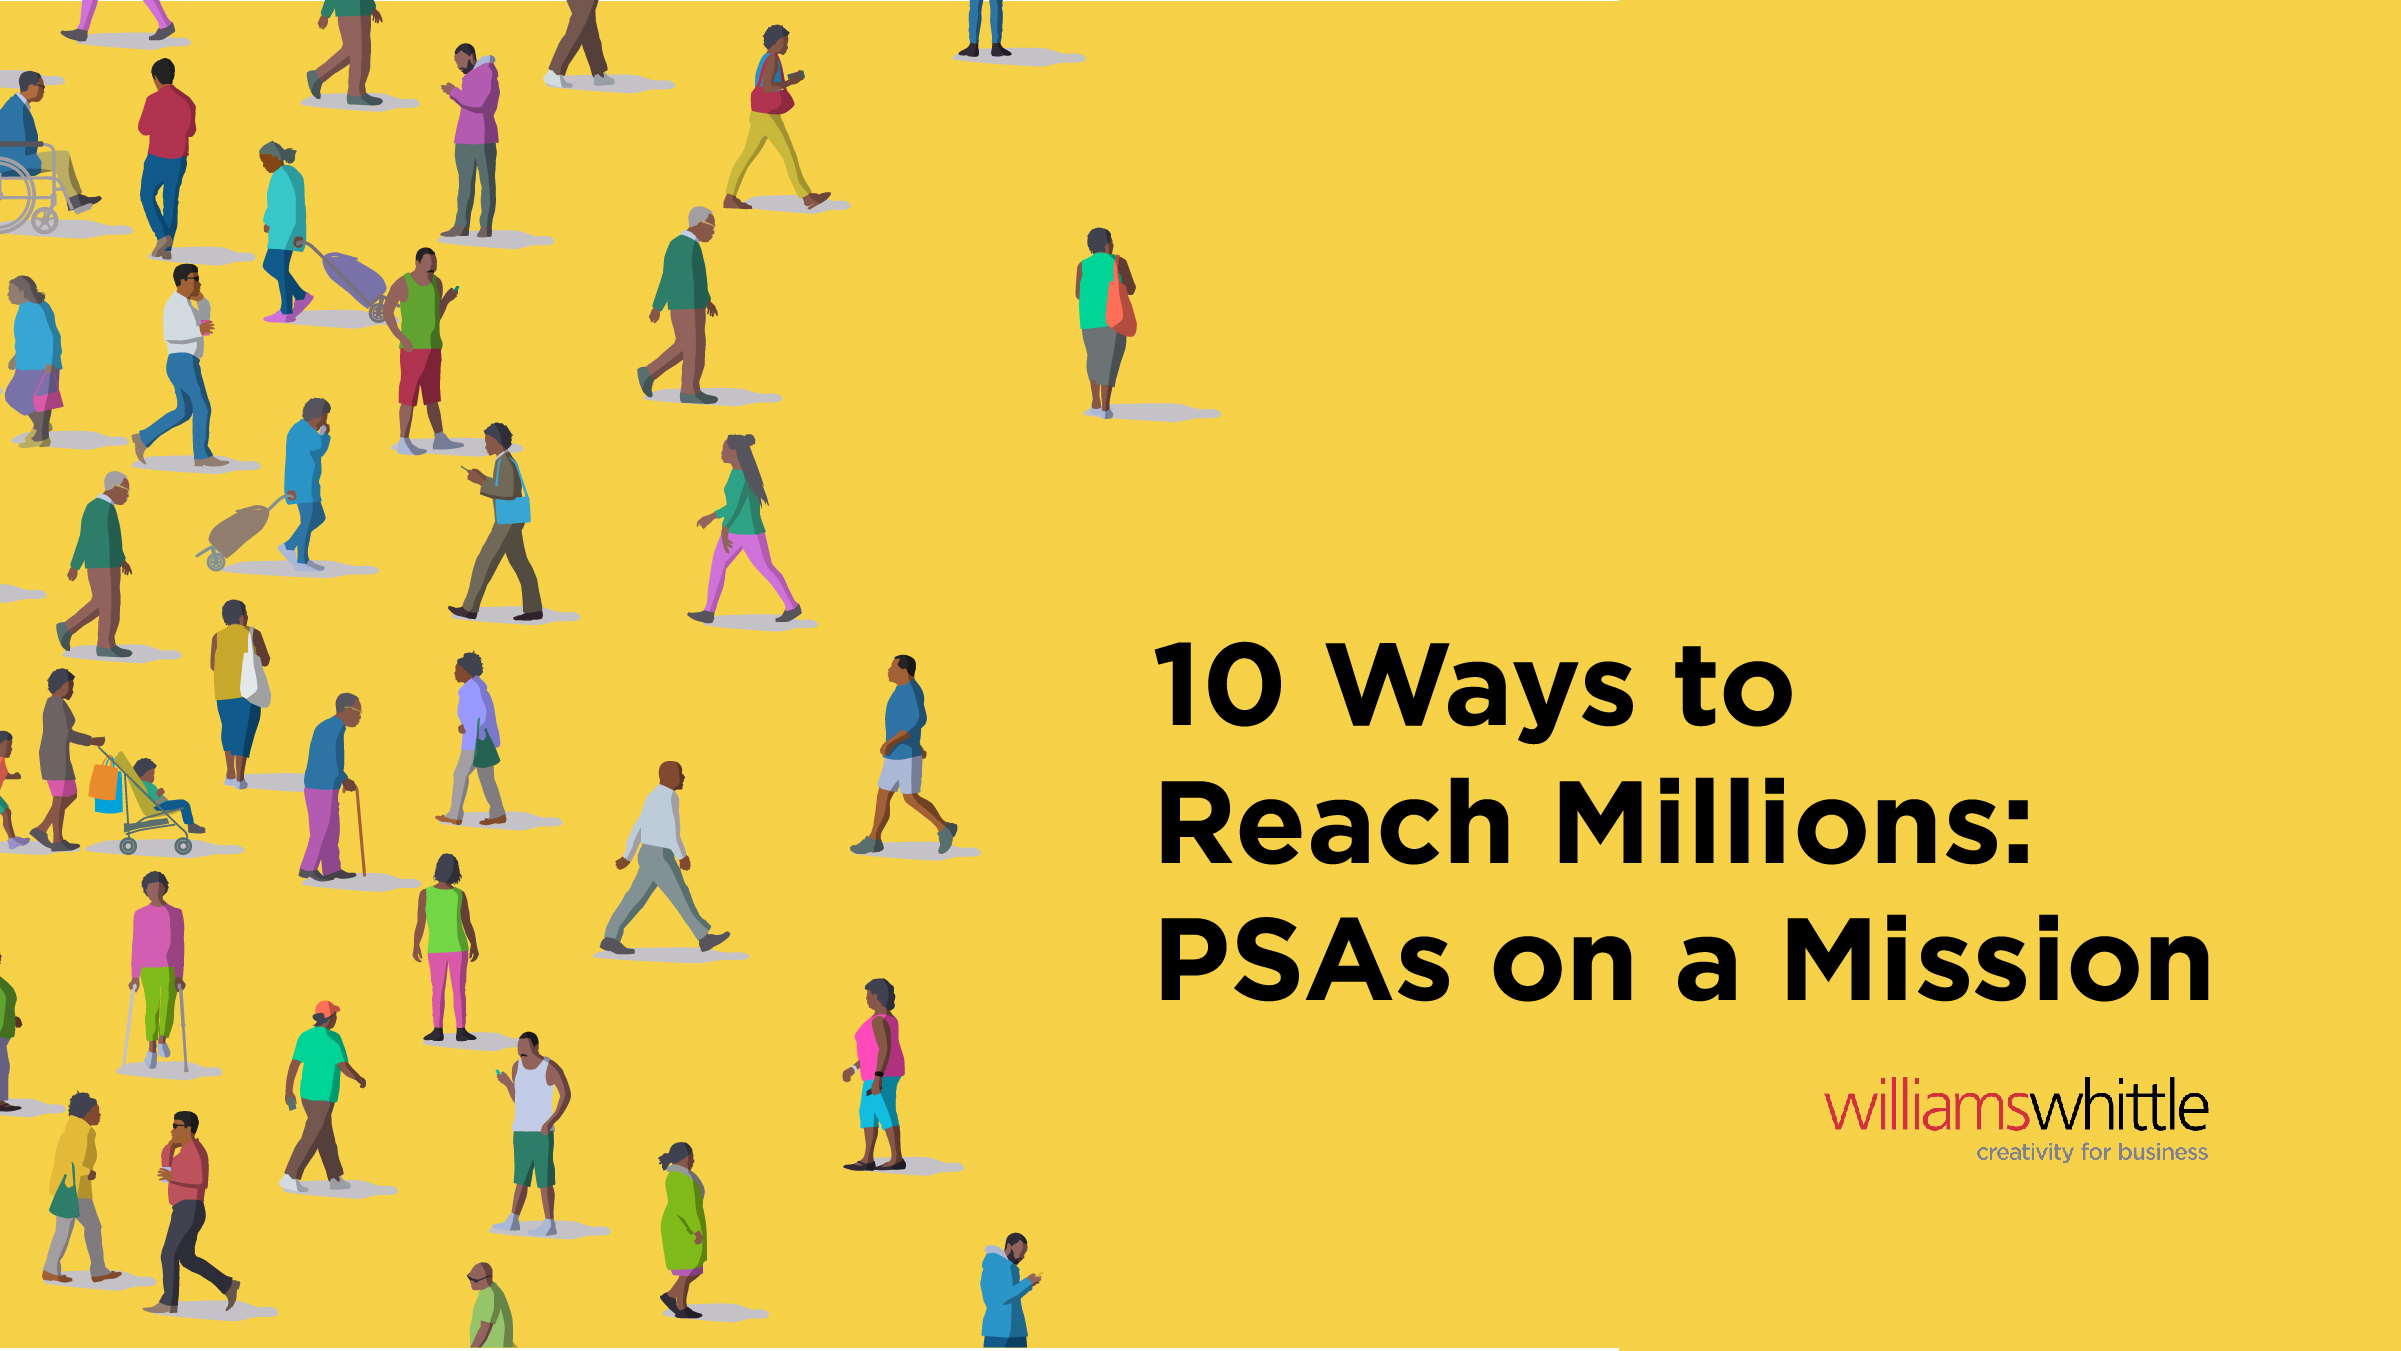 10 Ways to Reach Millions: PSAs on a Mission